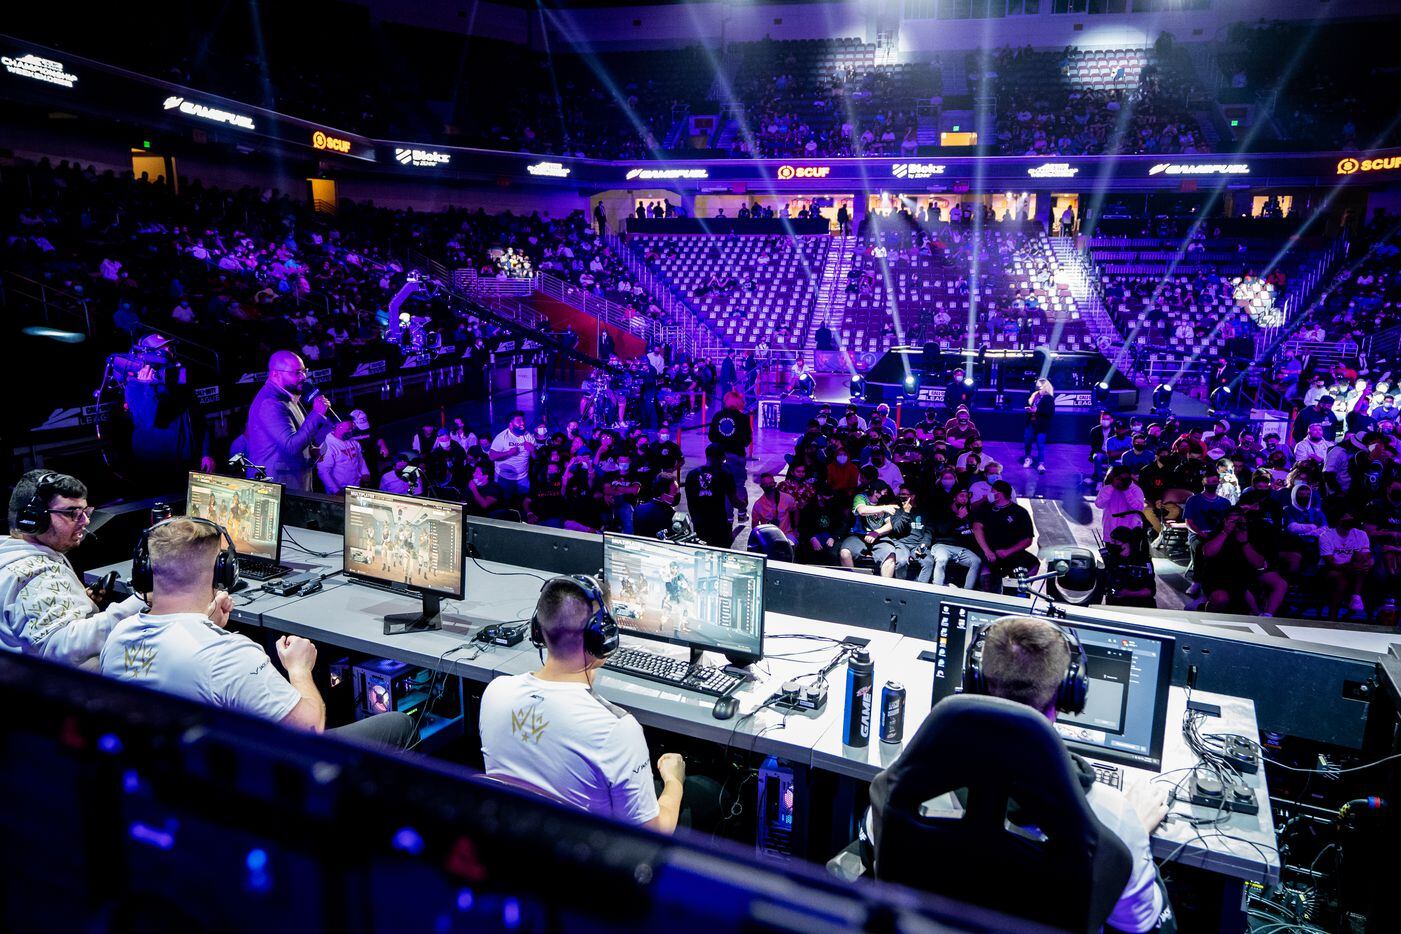 The Dallas Empire take the stage for their elimination match against the Toronto Ultra at the Call of Duty league playoffs at the Galen Center on Saturday, August 21, 2021 in Los Angeles, California.